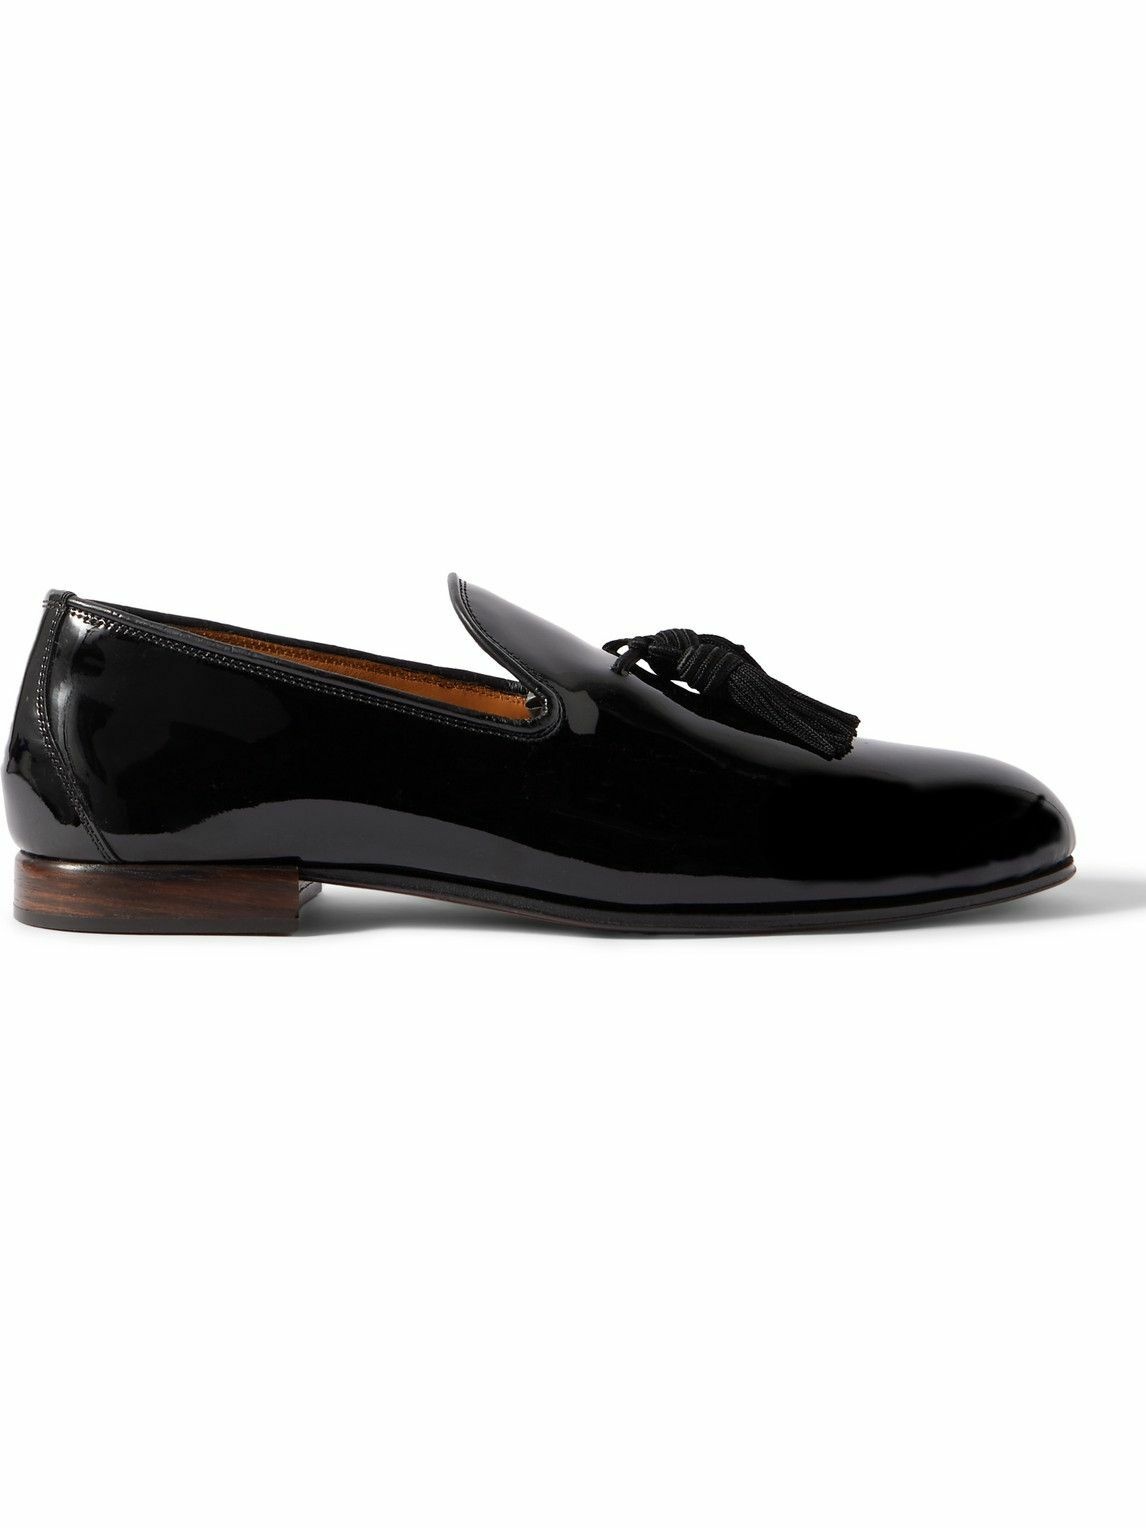 TOM FORD - Nicolas Tasselled Patent-Leather Loafers - Black TOM FORD